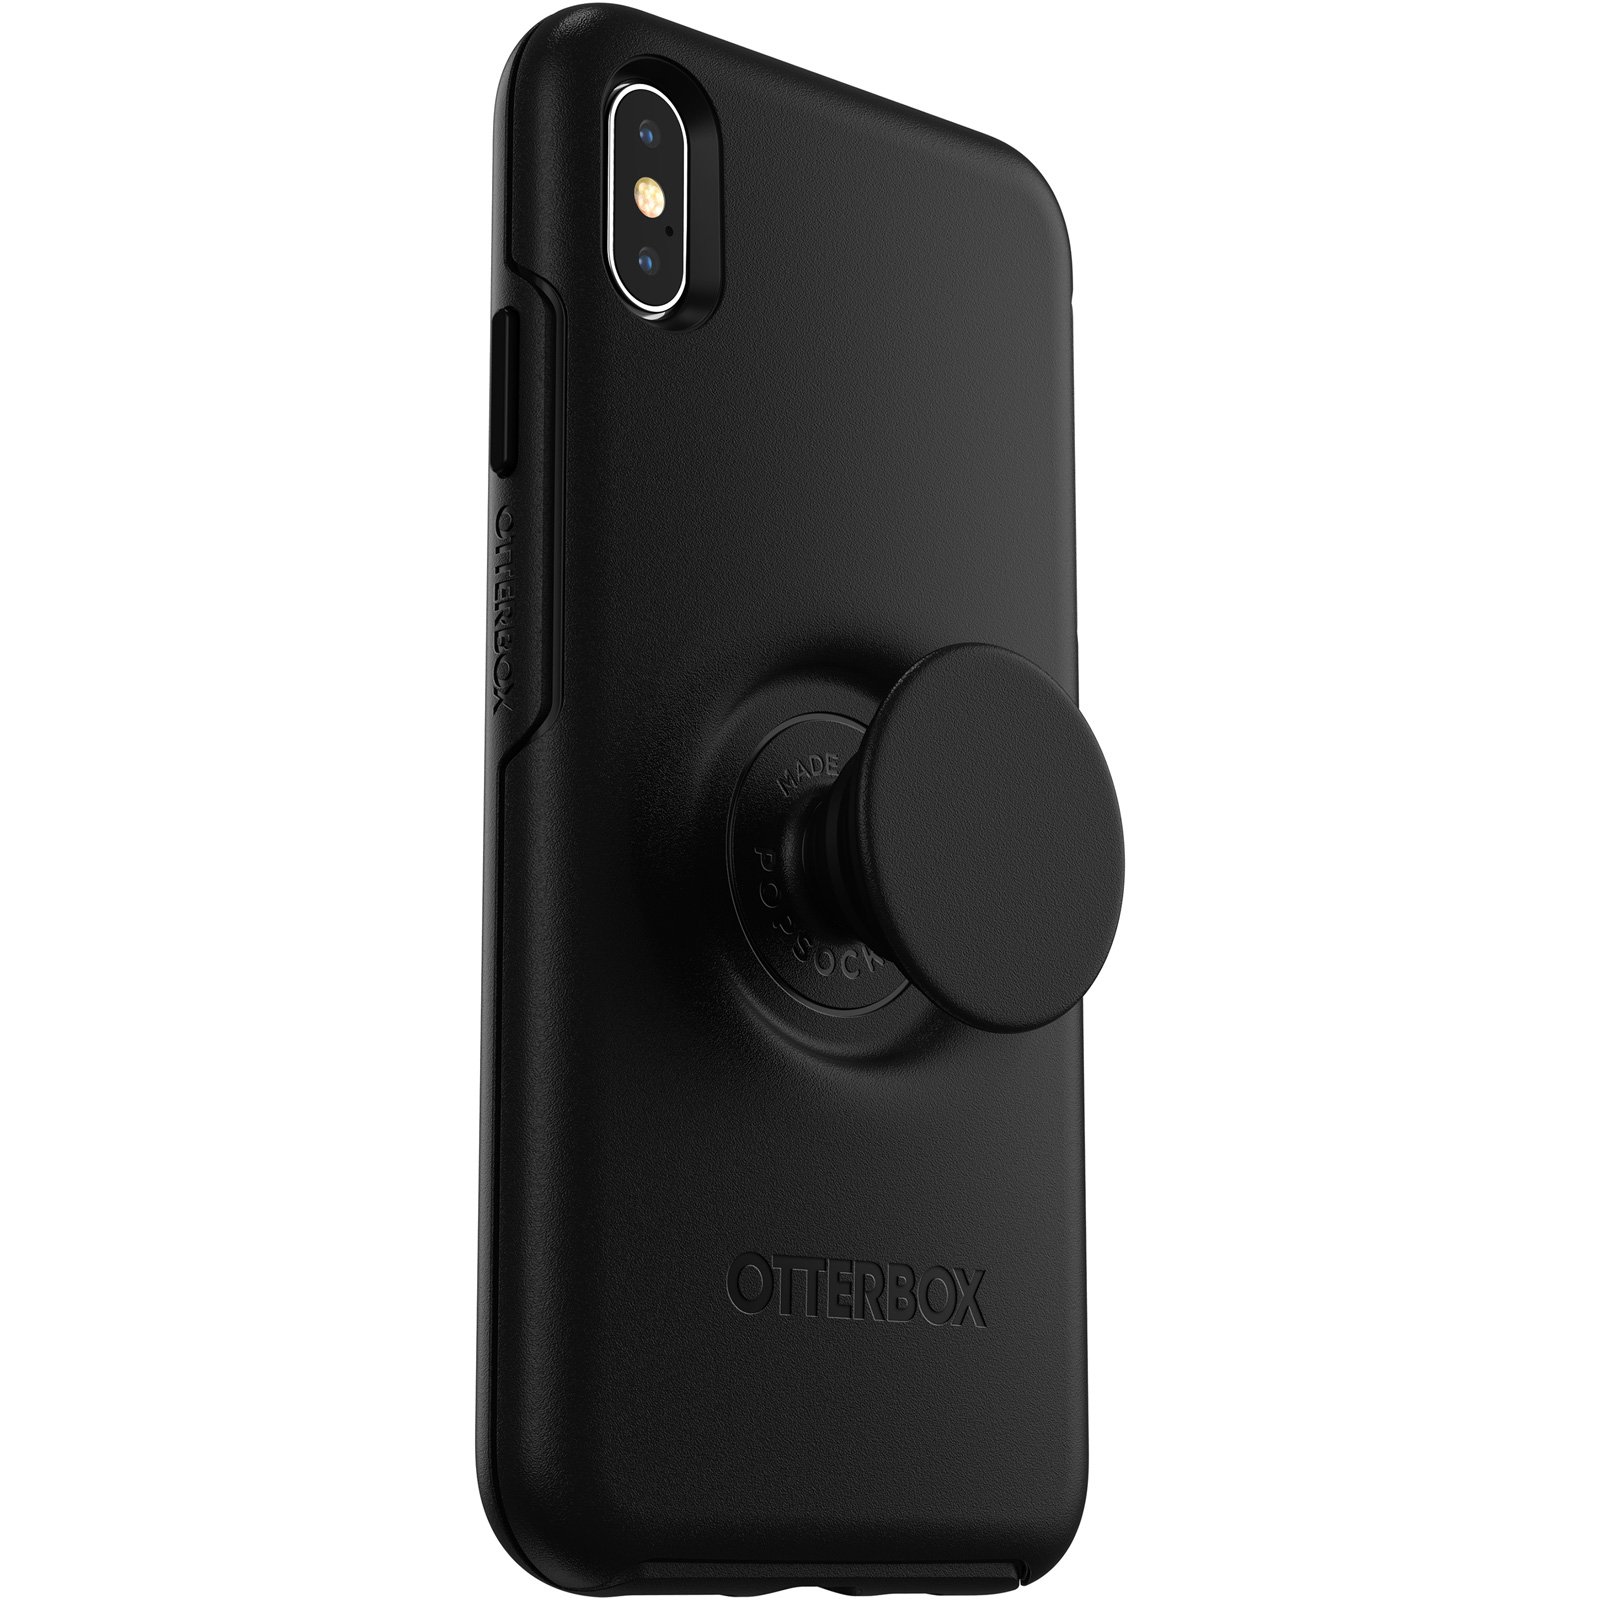 Cute PopSockets® case for iPhone Xs Max